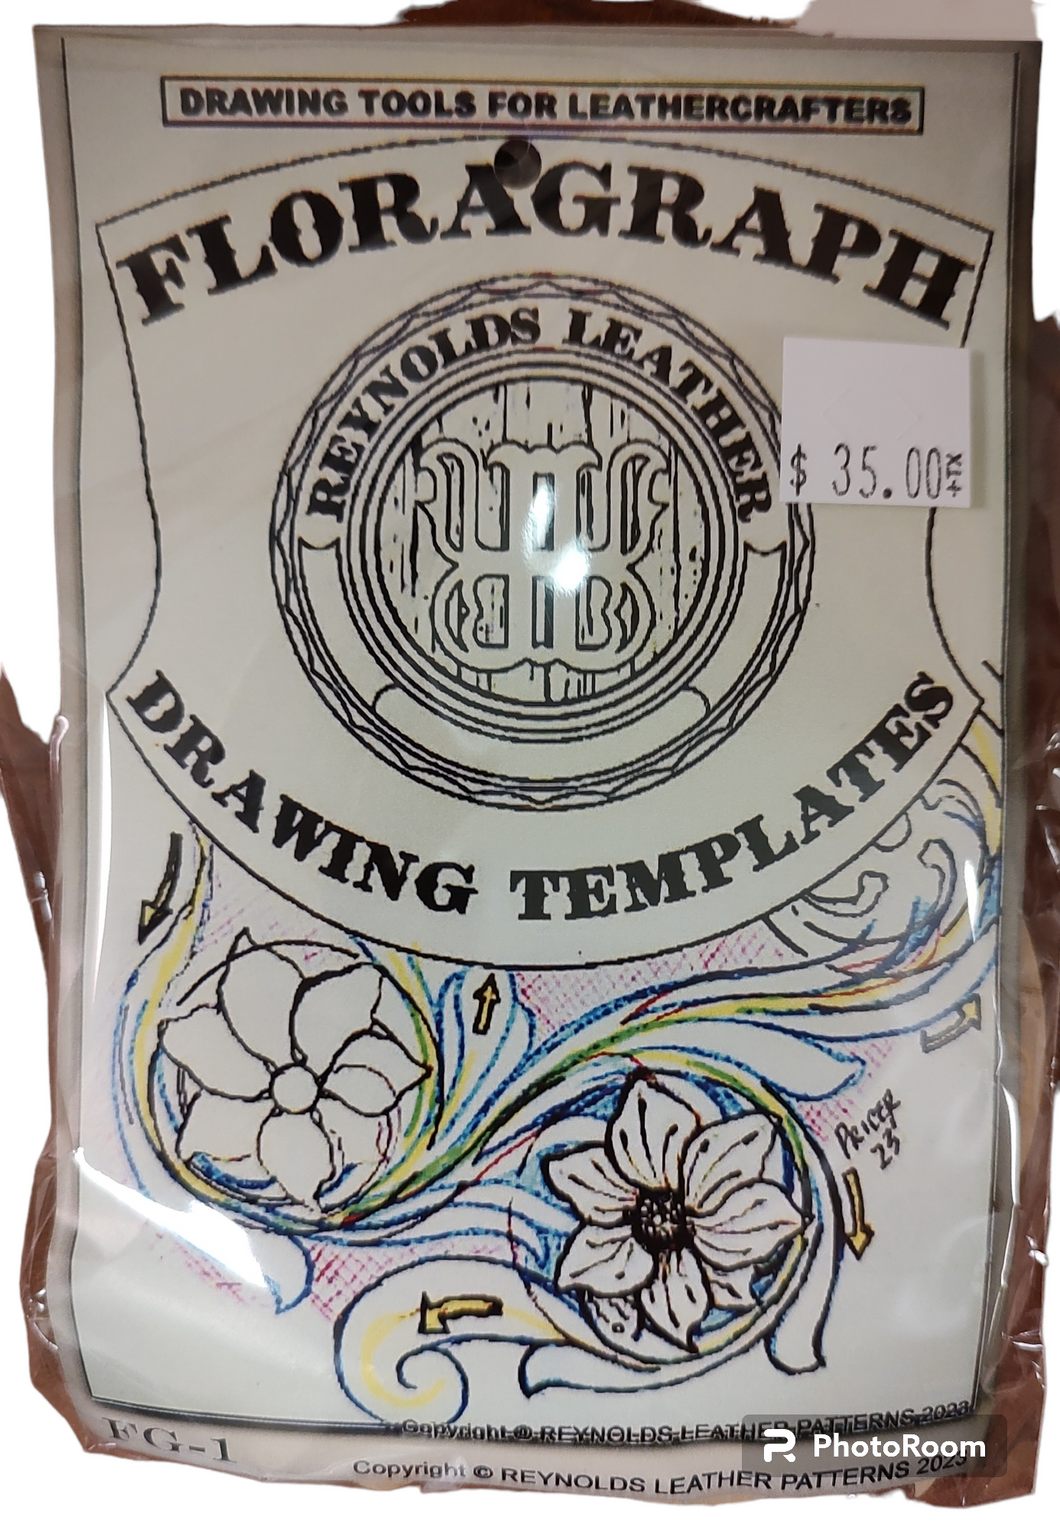 Floragraph Drawing Templates